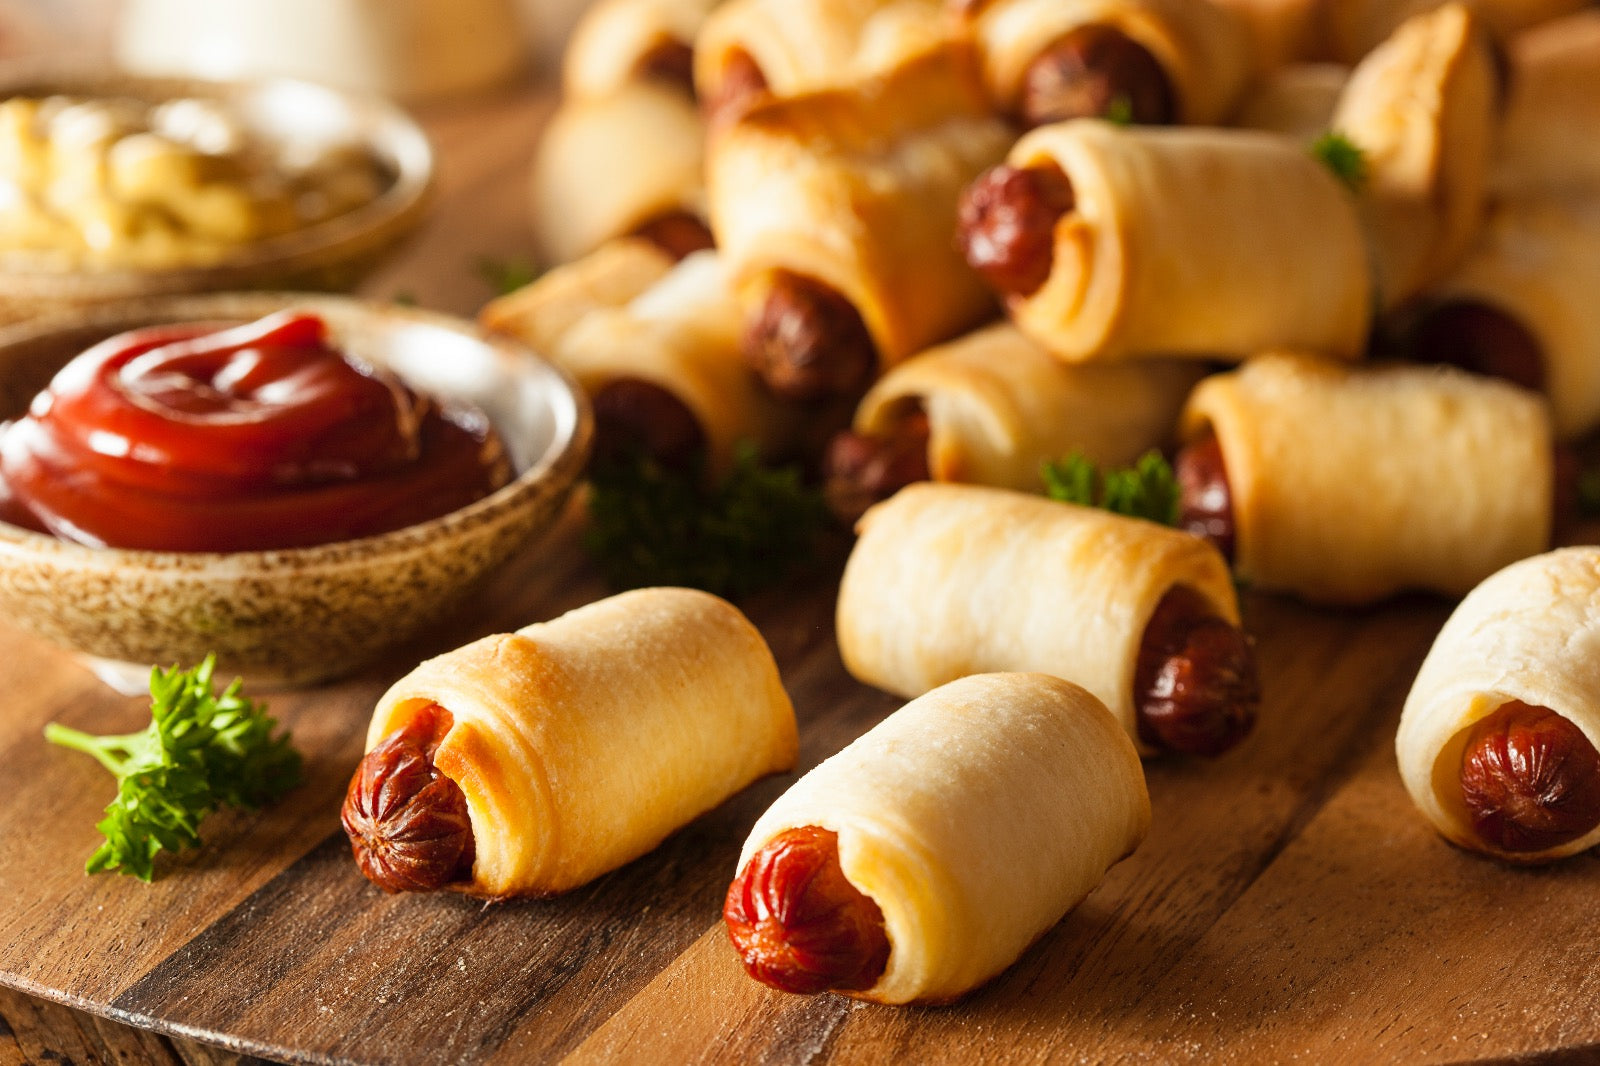 Halloween “Mummy” Pigs In A Blanket With Bison Hot Dogs - Beck & Bulow